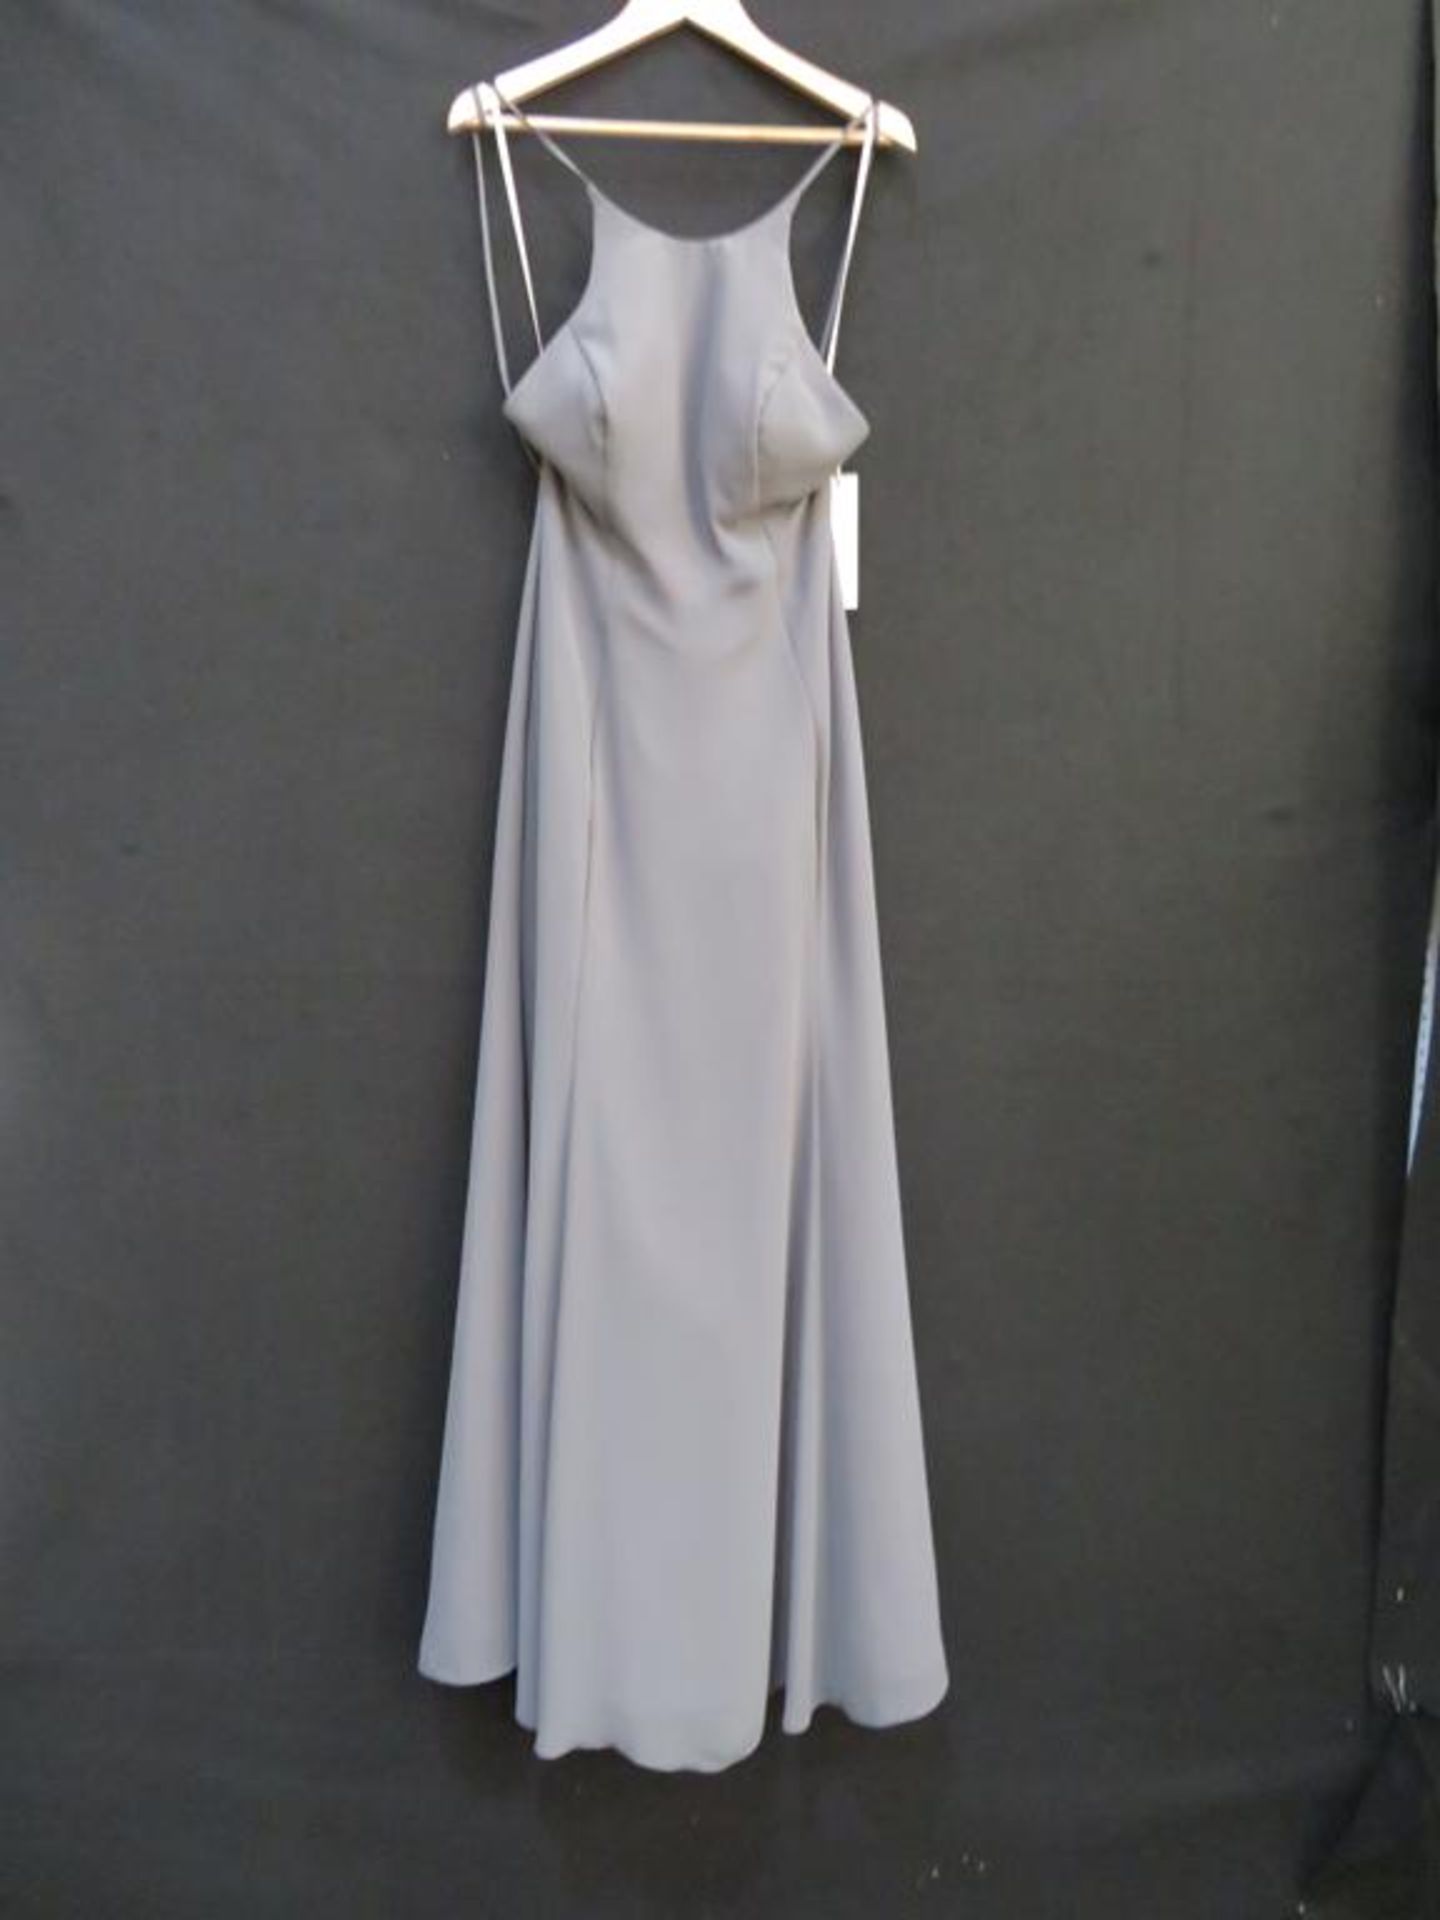 Five 'Charcoal/Pewter' Bridal Gowns in various styles